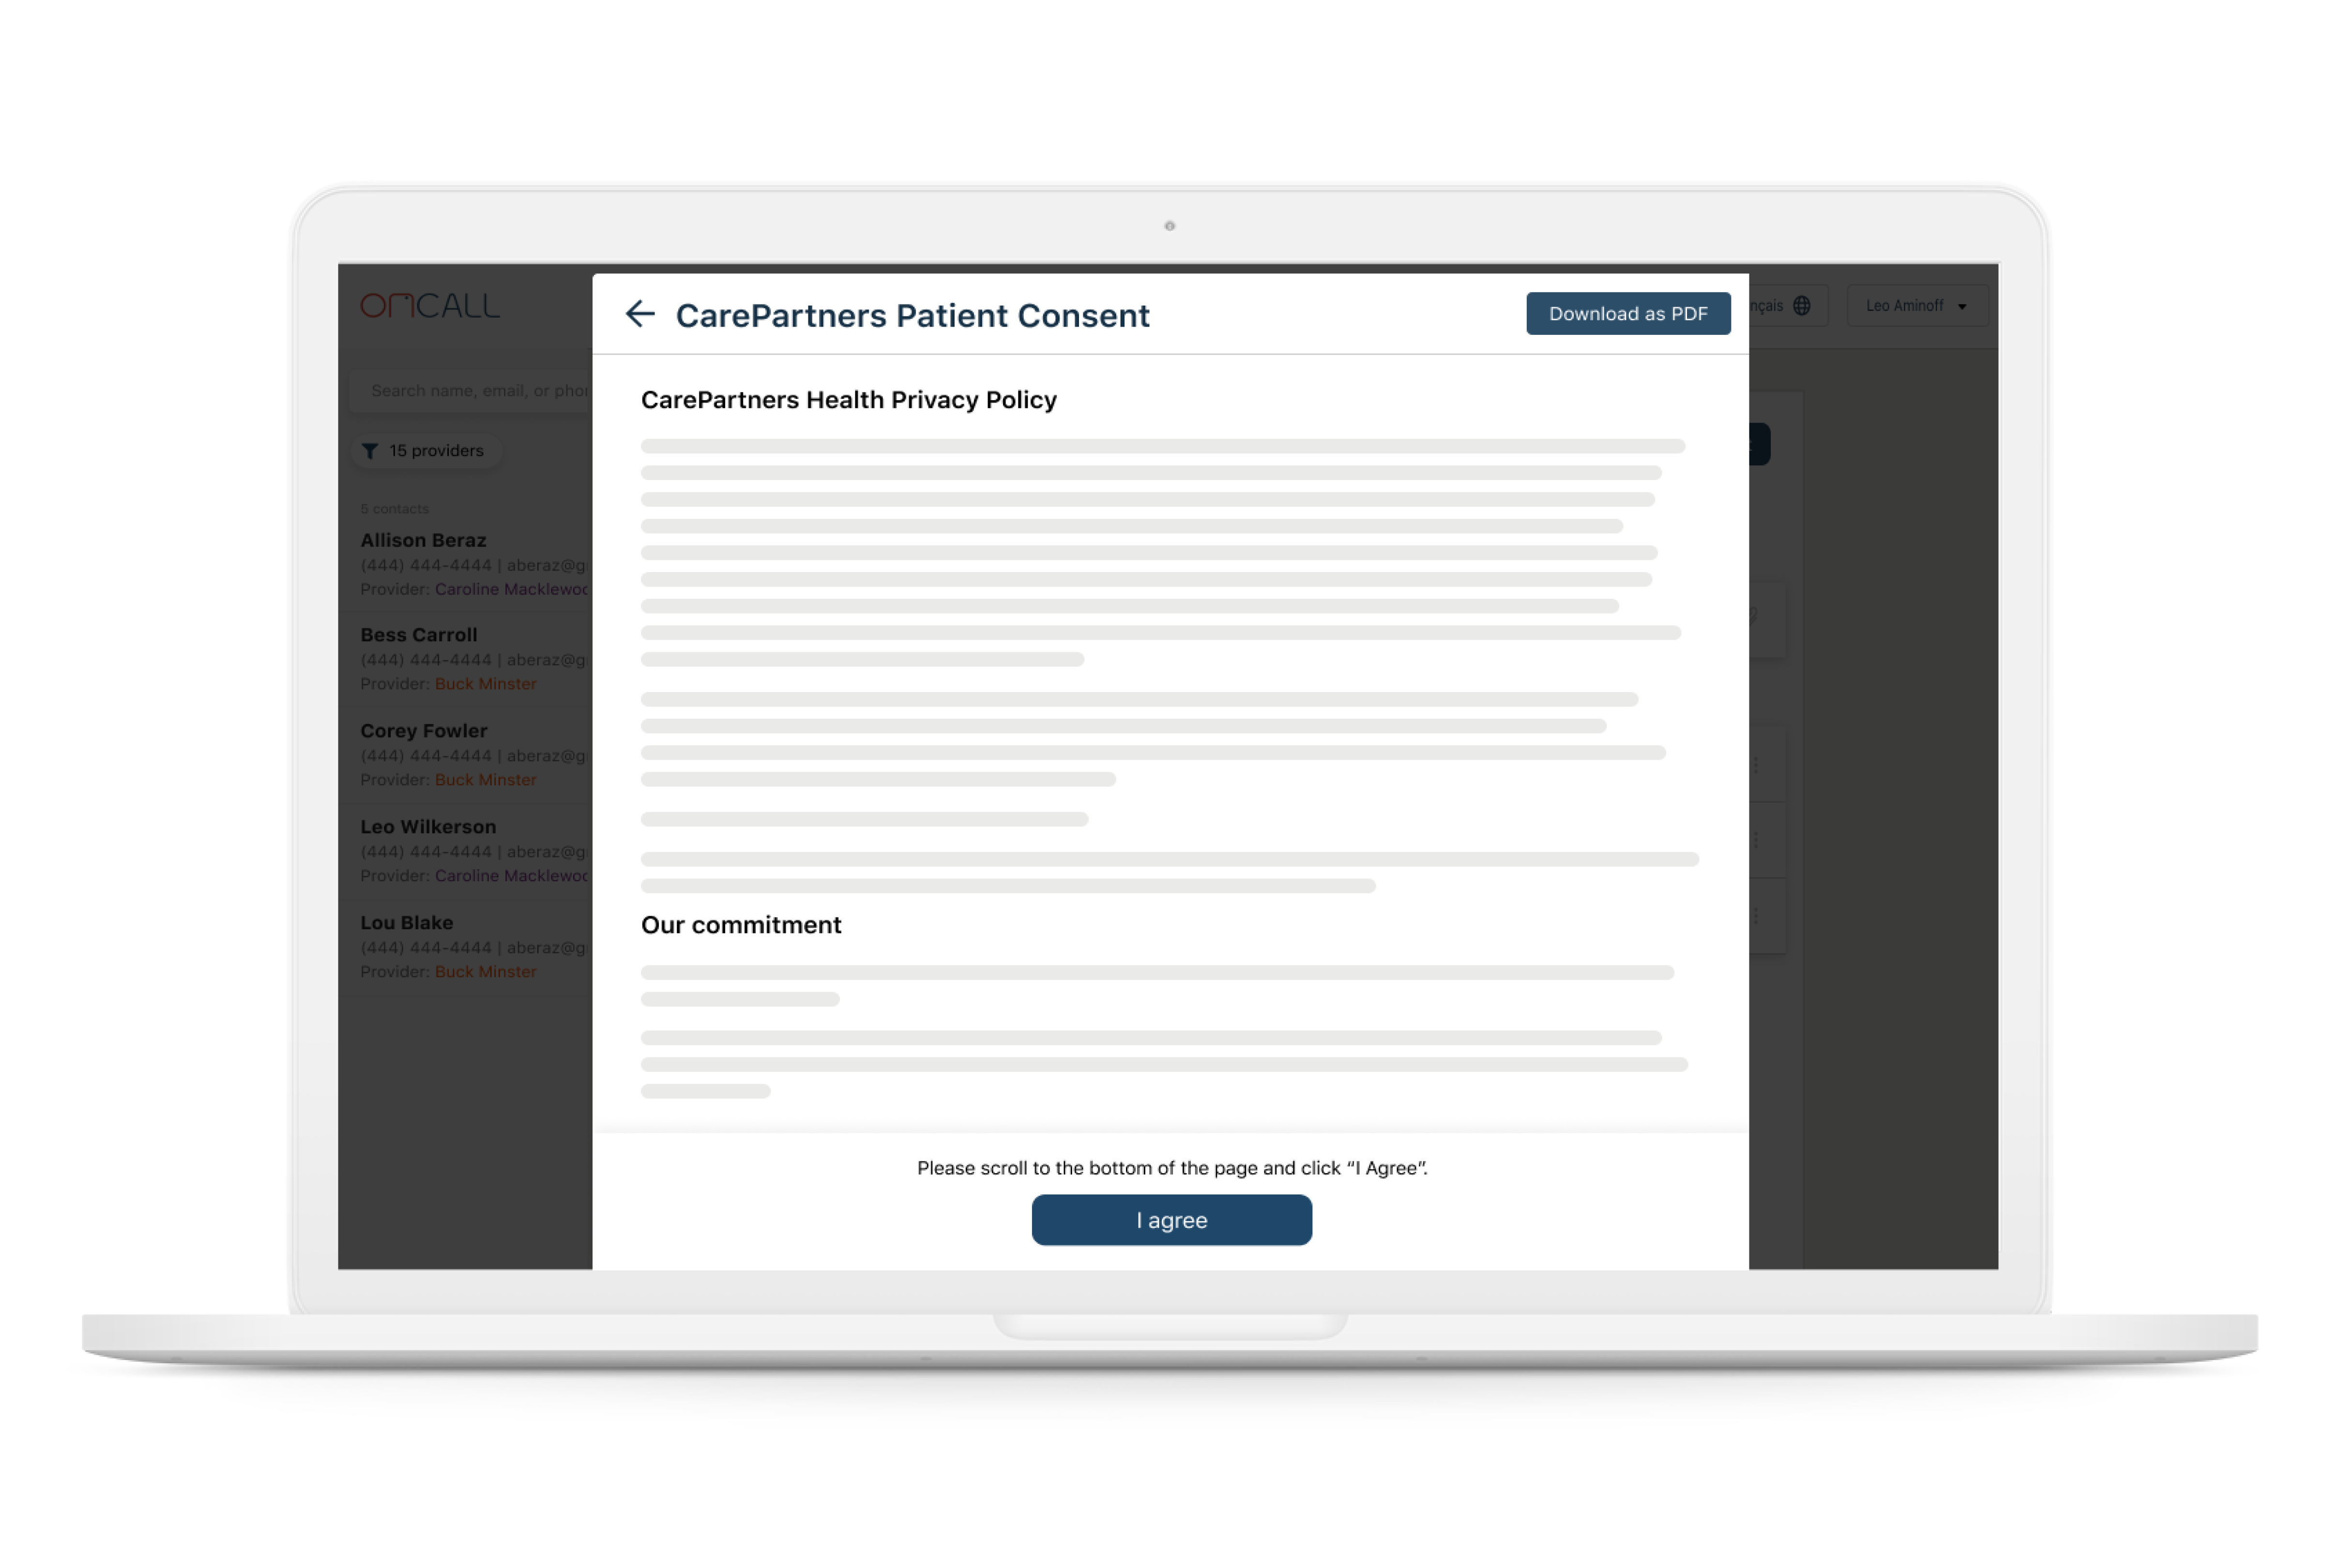 OnCall is HIPAA and PIPEDA compliant with 256 bit encryption ensuring data is secure. Patients complete a personalized privacy consent form prior to signing up as well.